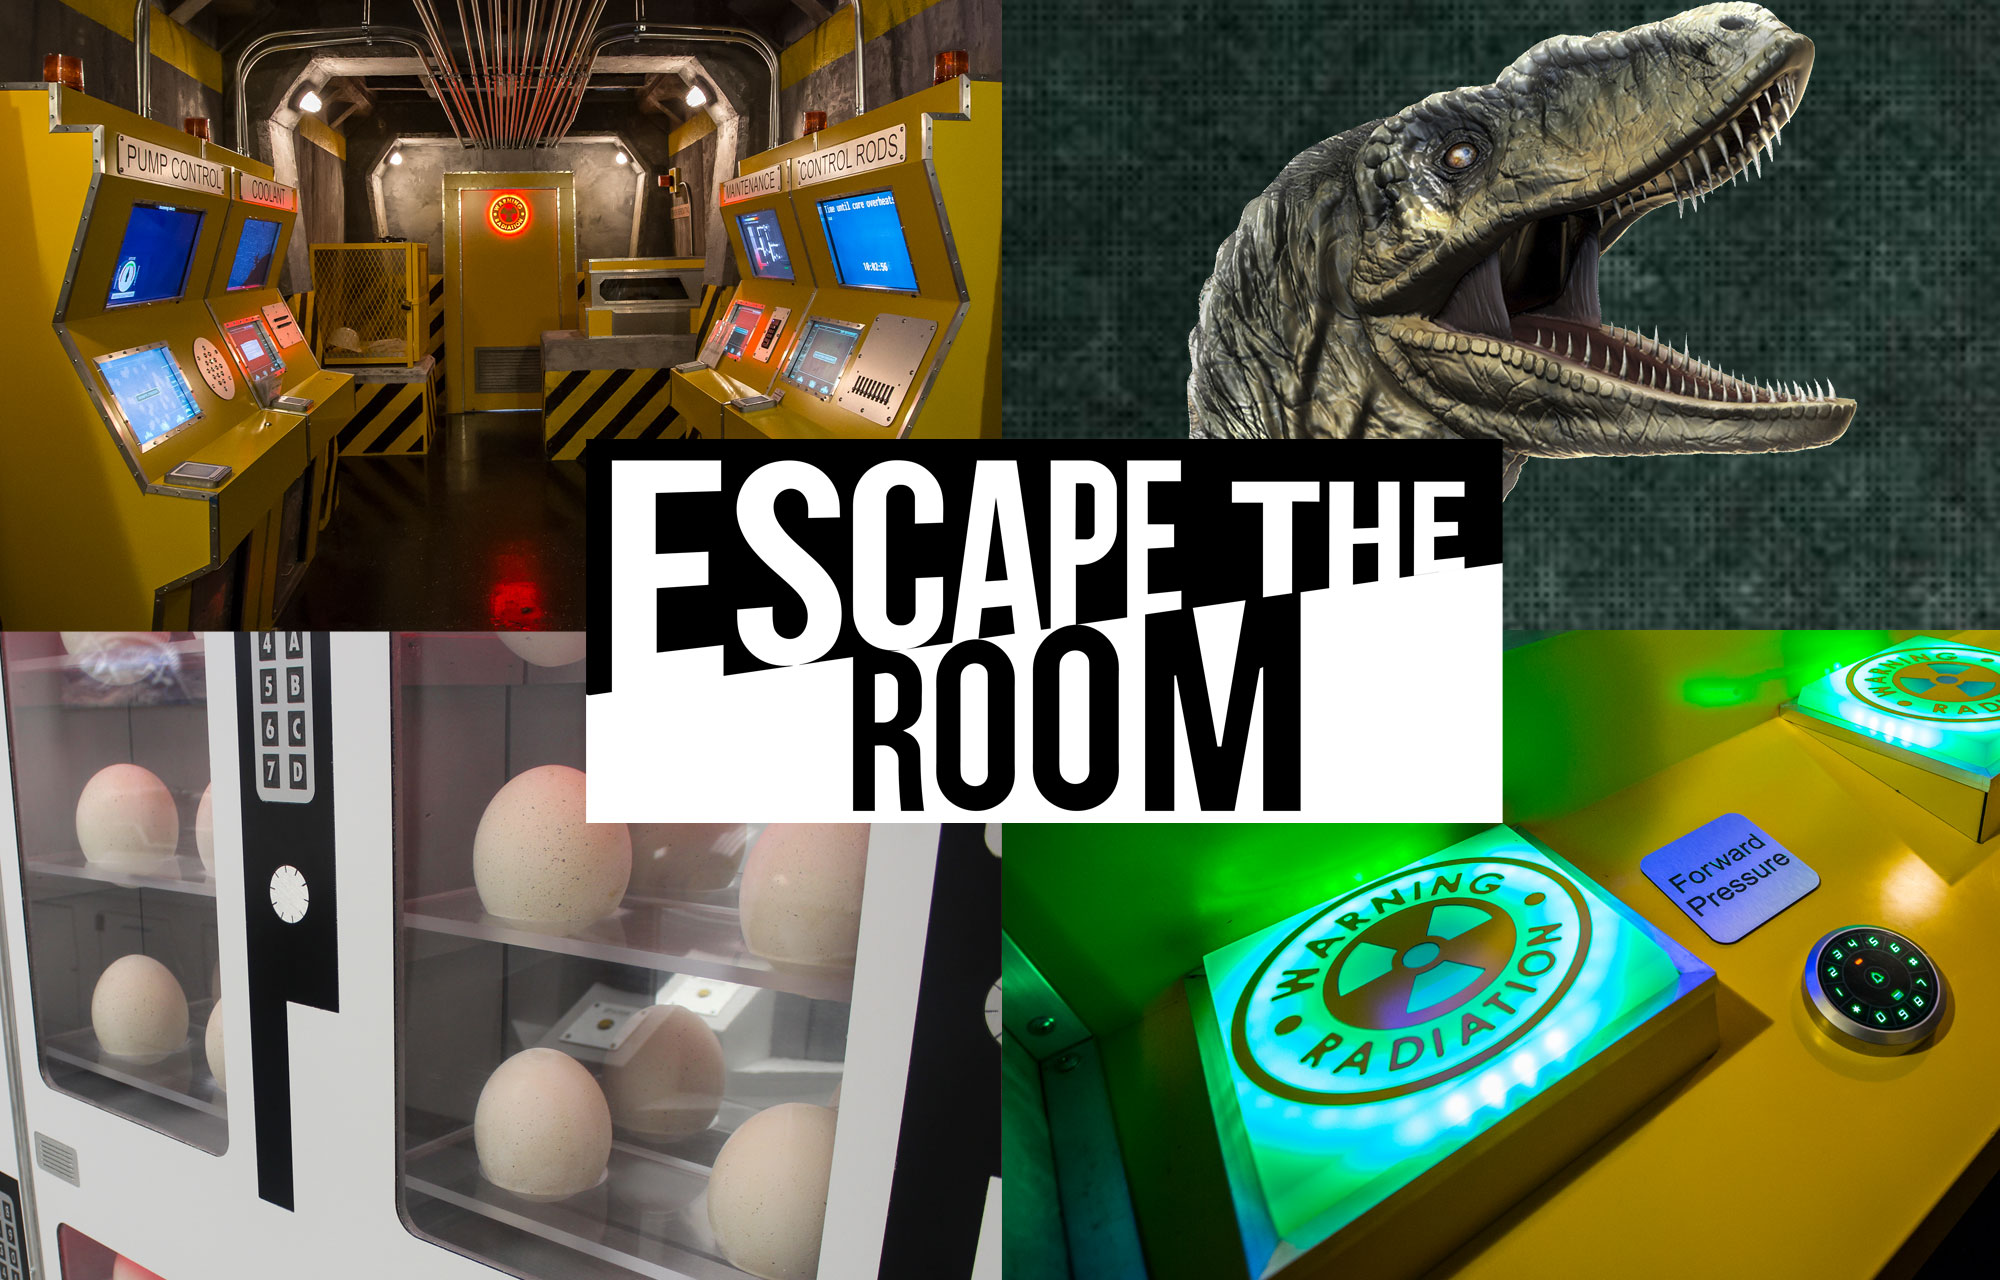 This NYC luxury escape room takes the game to its 'second inning